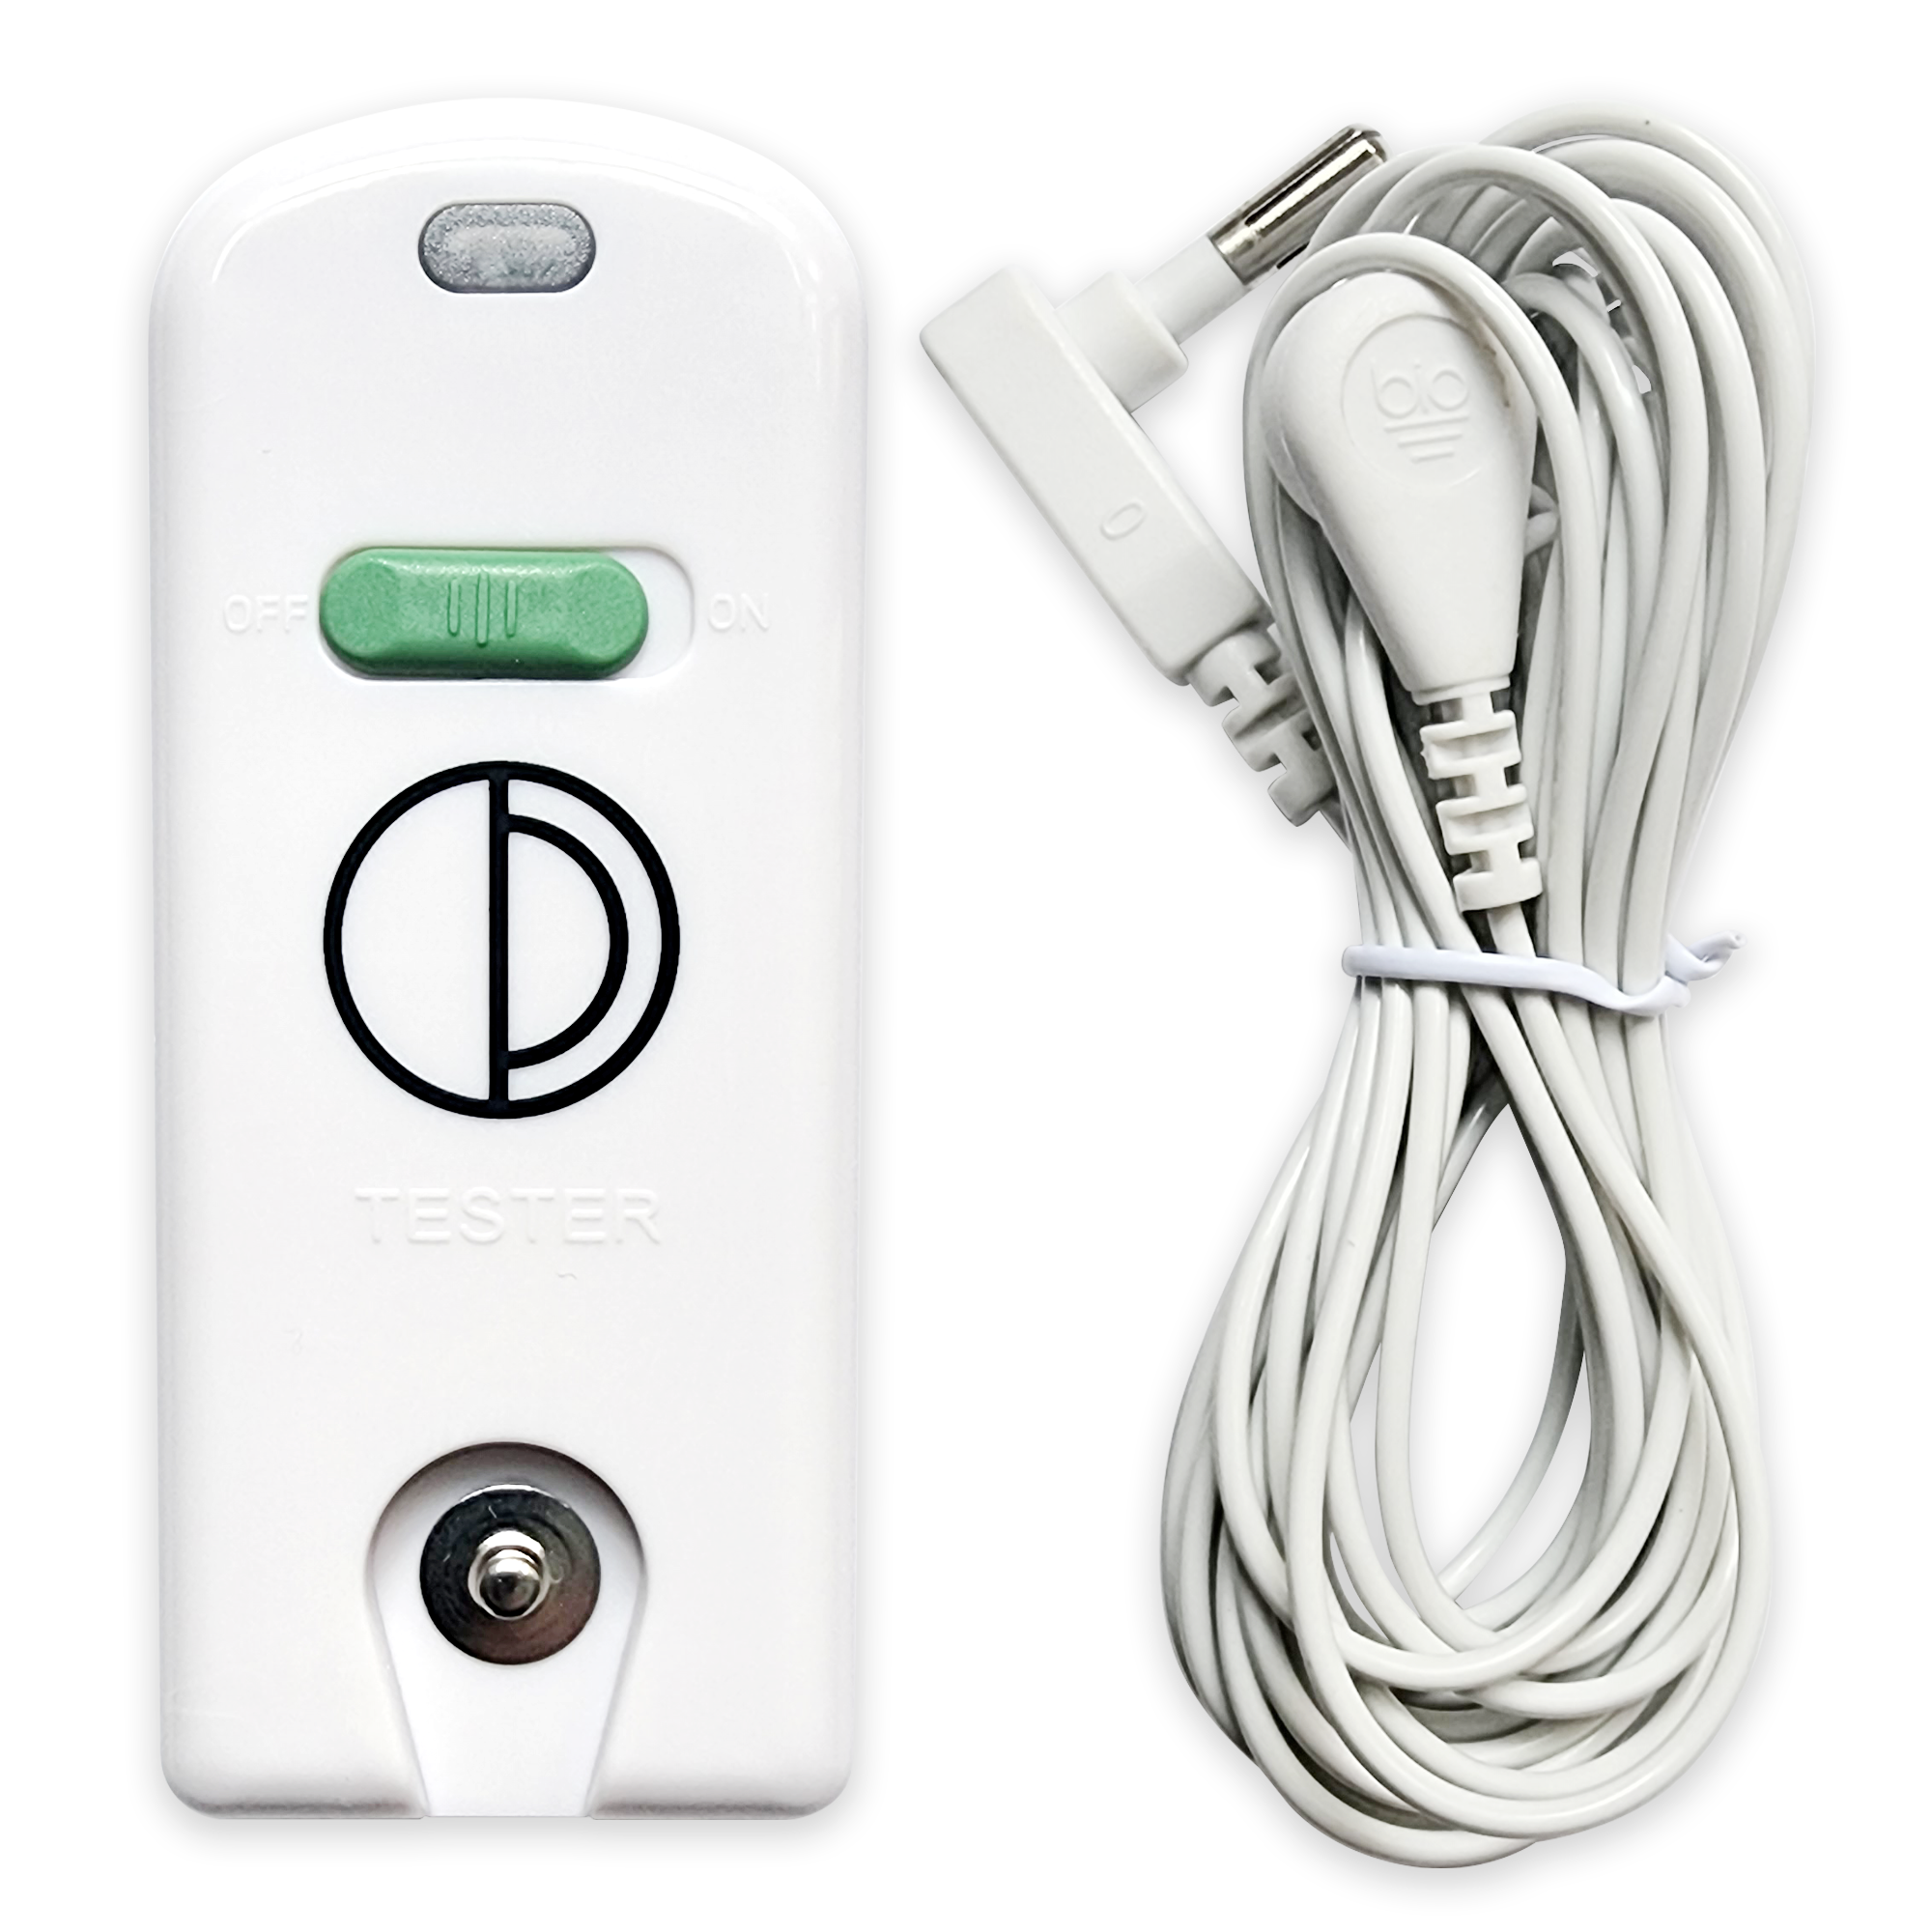 earth ground continuity tester to test cord and earthing products